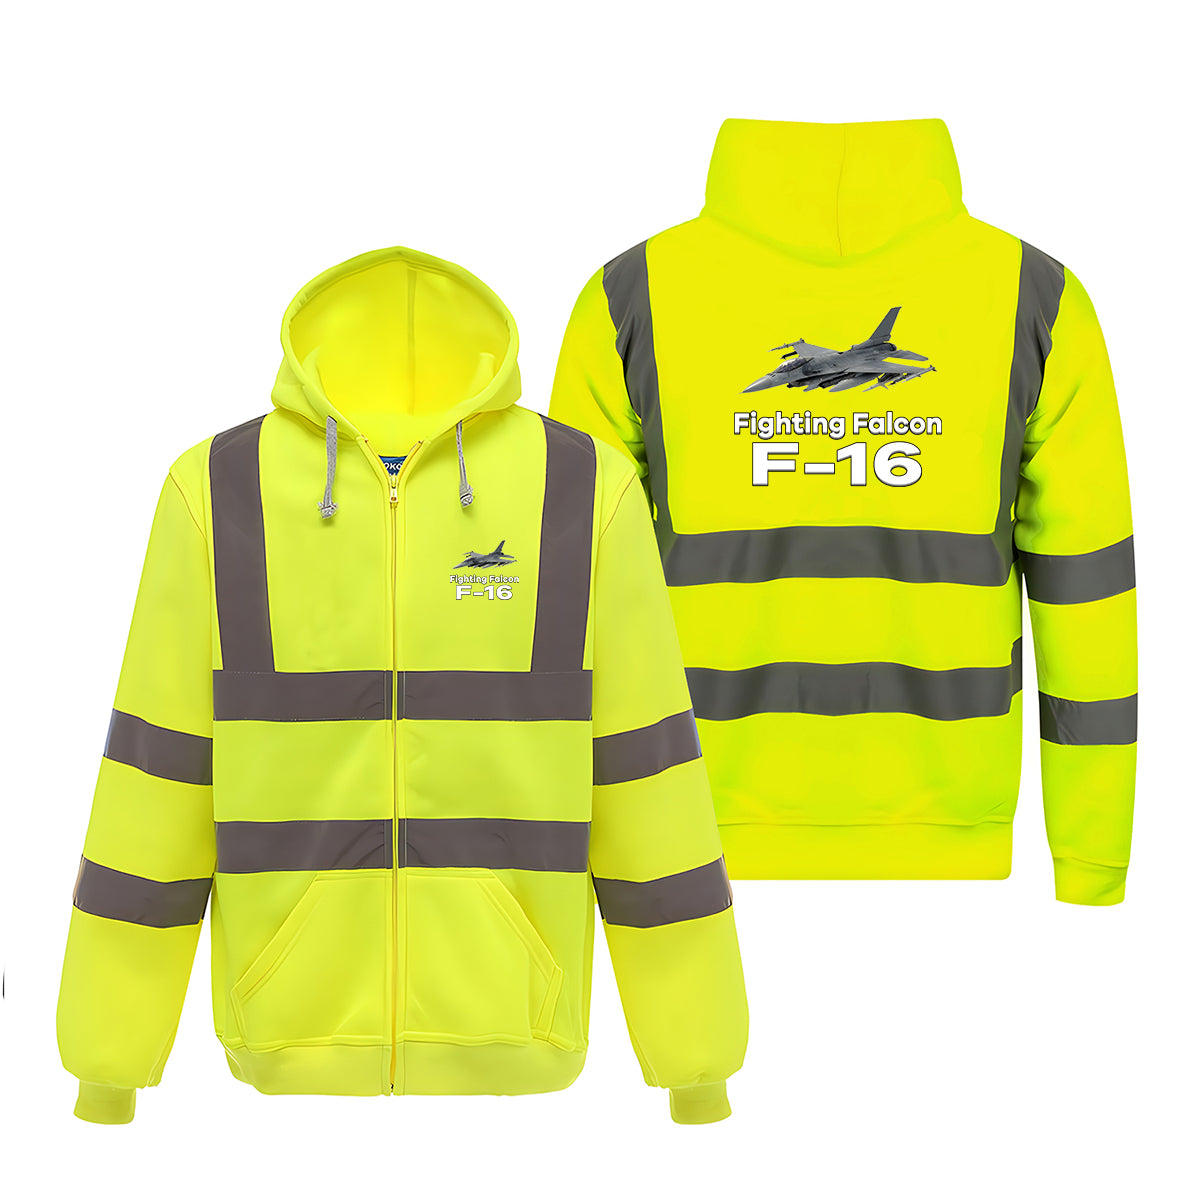 The Fighting Falcon F16 Designed Reflective Zipped Hoodies